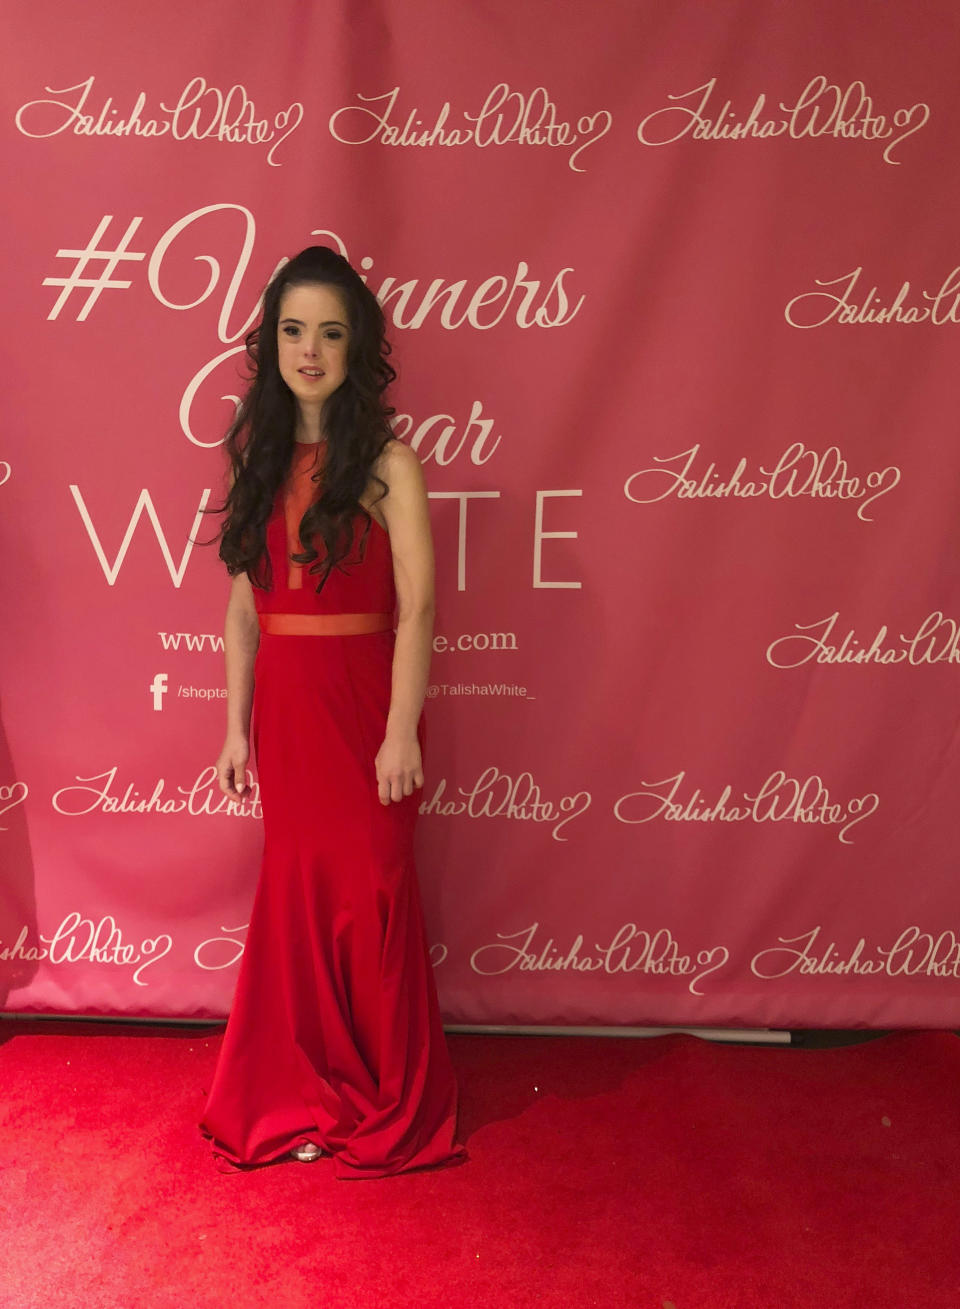 Model Marian Avila wears an outfit from the Talisha White 2019 spring collection on the red carpet during Fashion Week, Saturday, Sept. 8, 2018, in New York. Avila, a 21-year-old Spanish model with Down syndrome, fulfilled her dream to walk at New York Fashion Week thanks to White, the Atlanta designer she met through the magic of social media. (AP Photo/Leanne Italie)